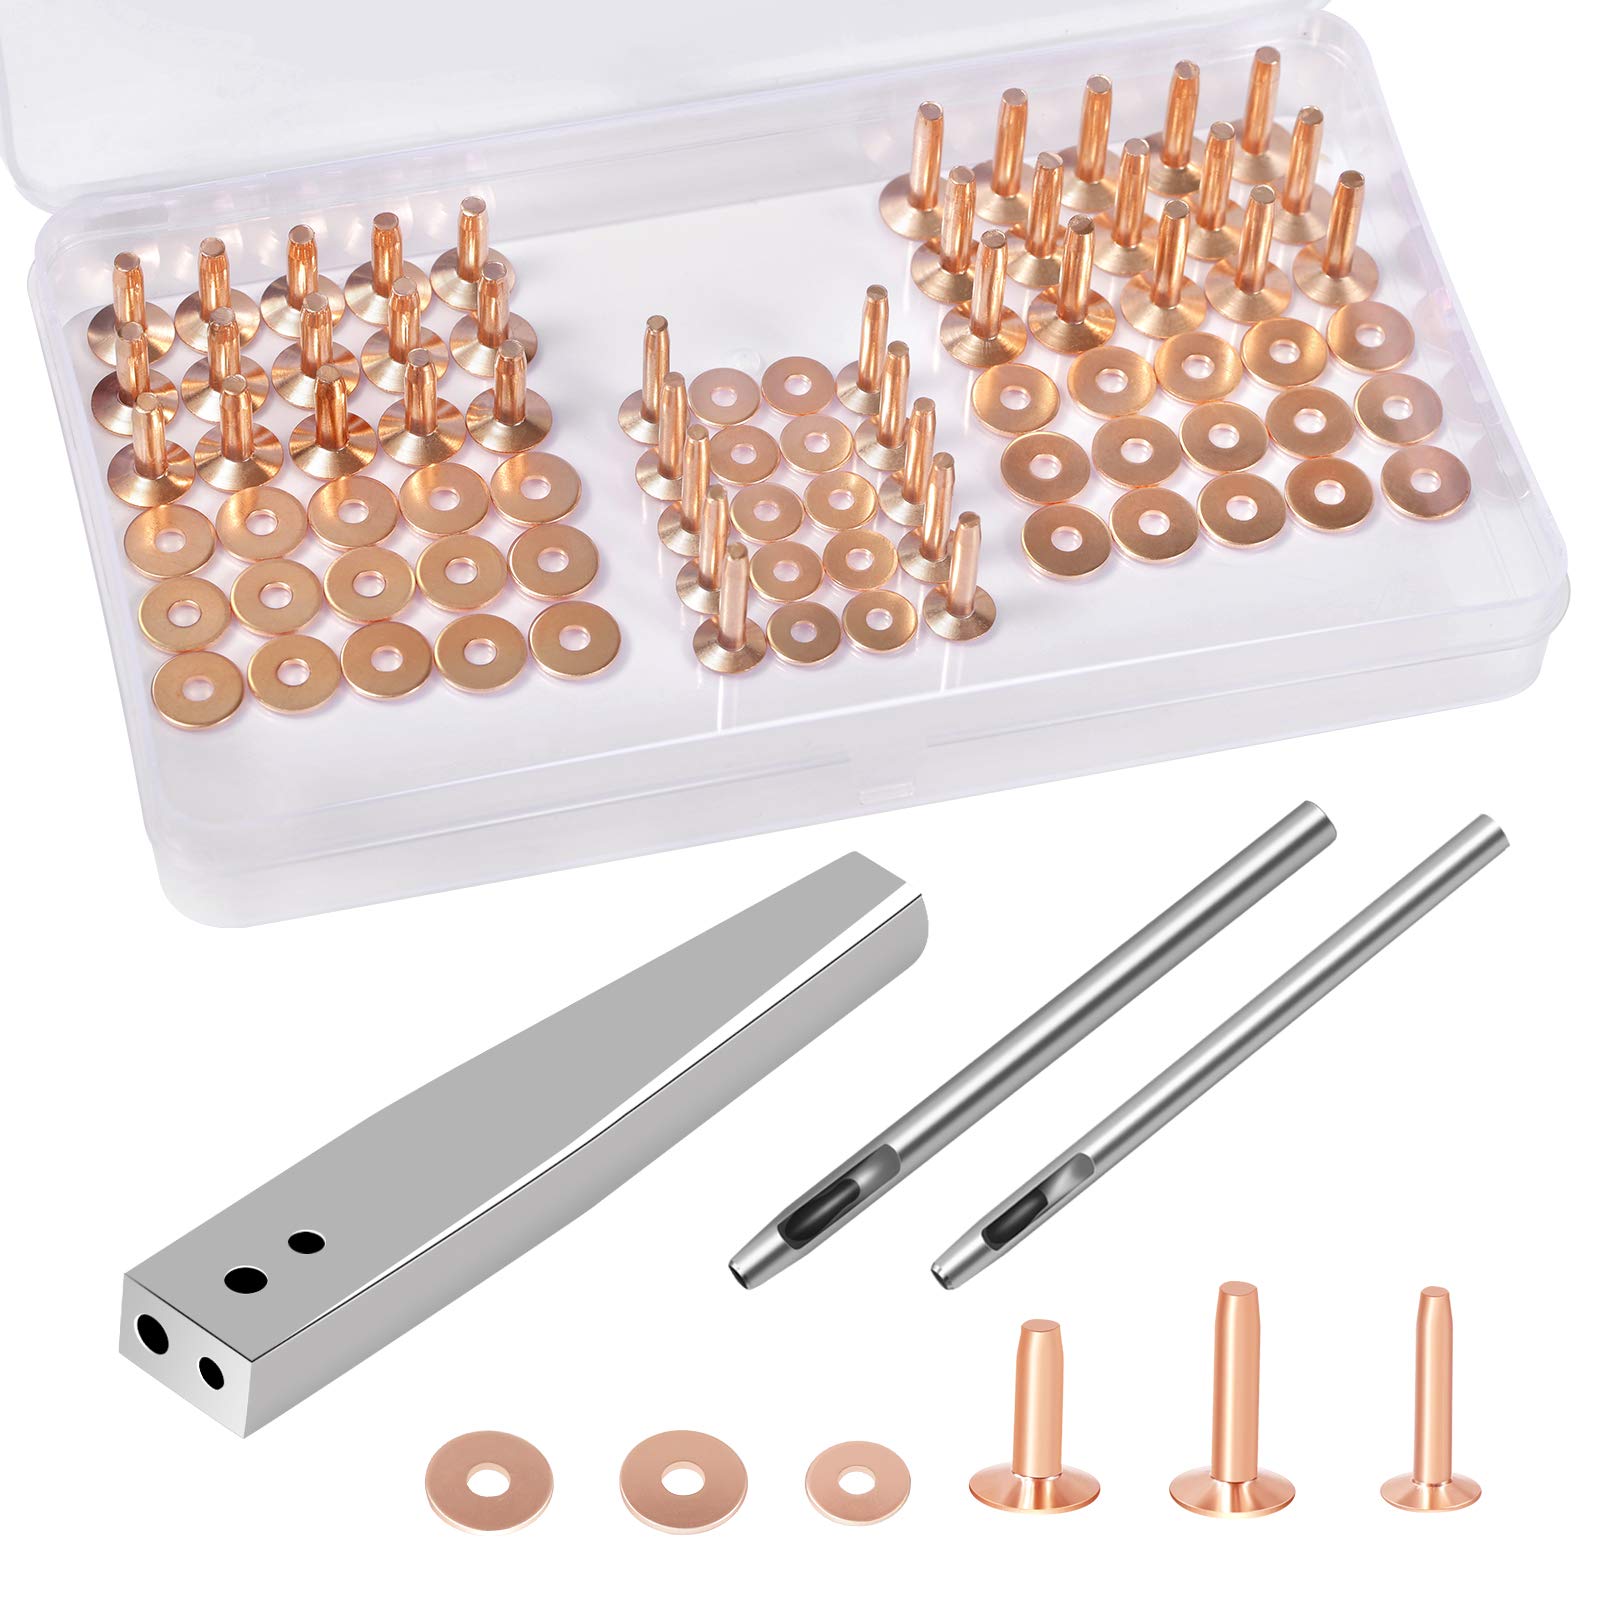 JUNESunShine 84Pcs Copper Rivets and Burrs 9 and 12 Burrs Setter Leather  Rivets Fastener Install Setting Tool with 4mm Leather Hole Punch Cutter for  Belts Wallets Collars Leather Working Supplies 1 Copper Rivet Set